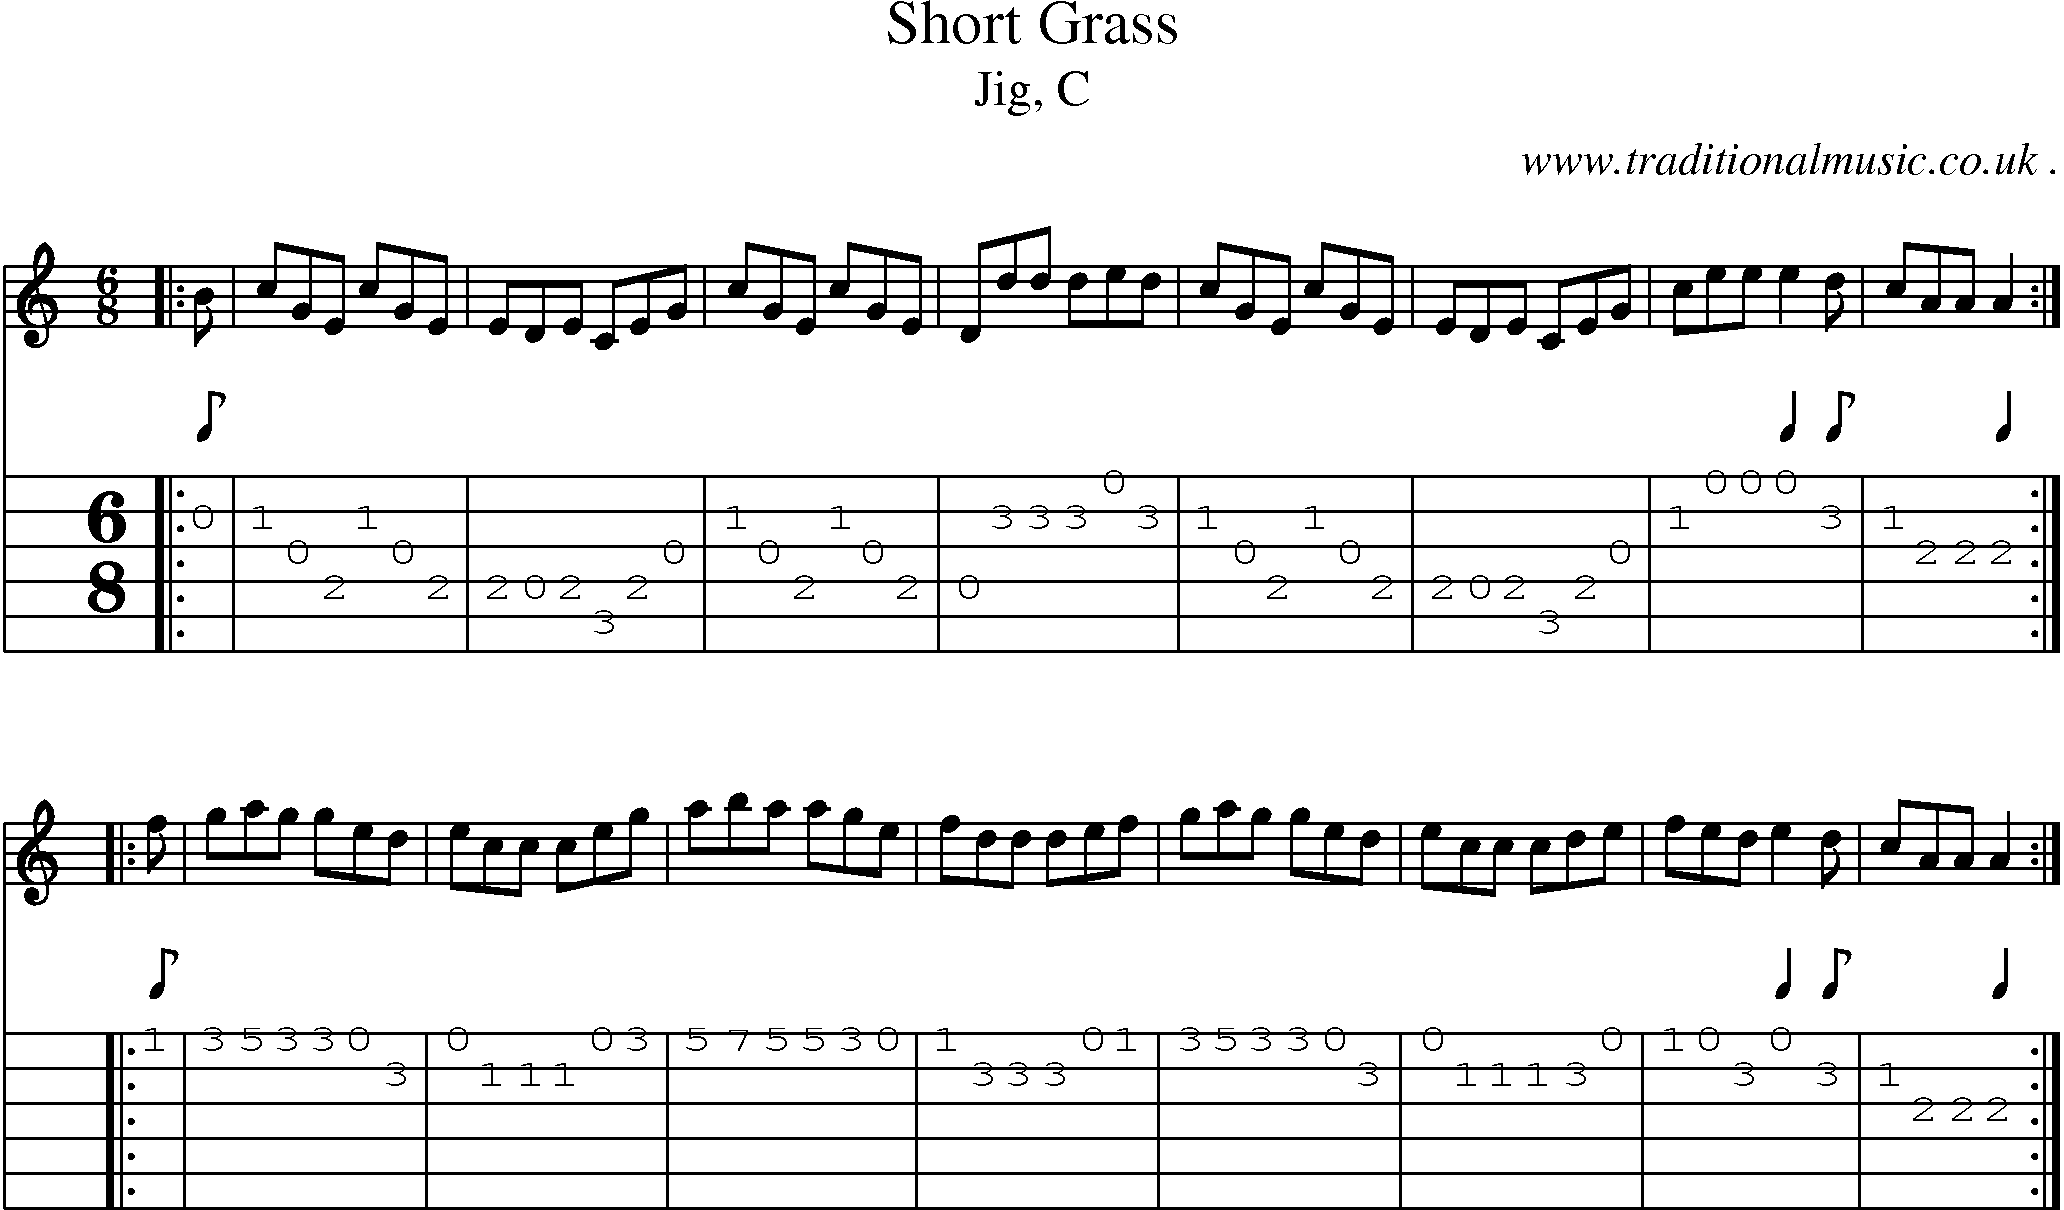 Sheet-music  score, Chords and Guitar Tabs for Short Grass